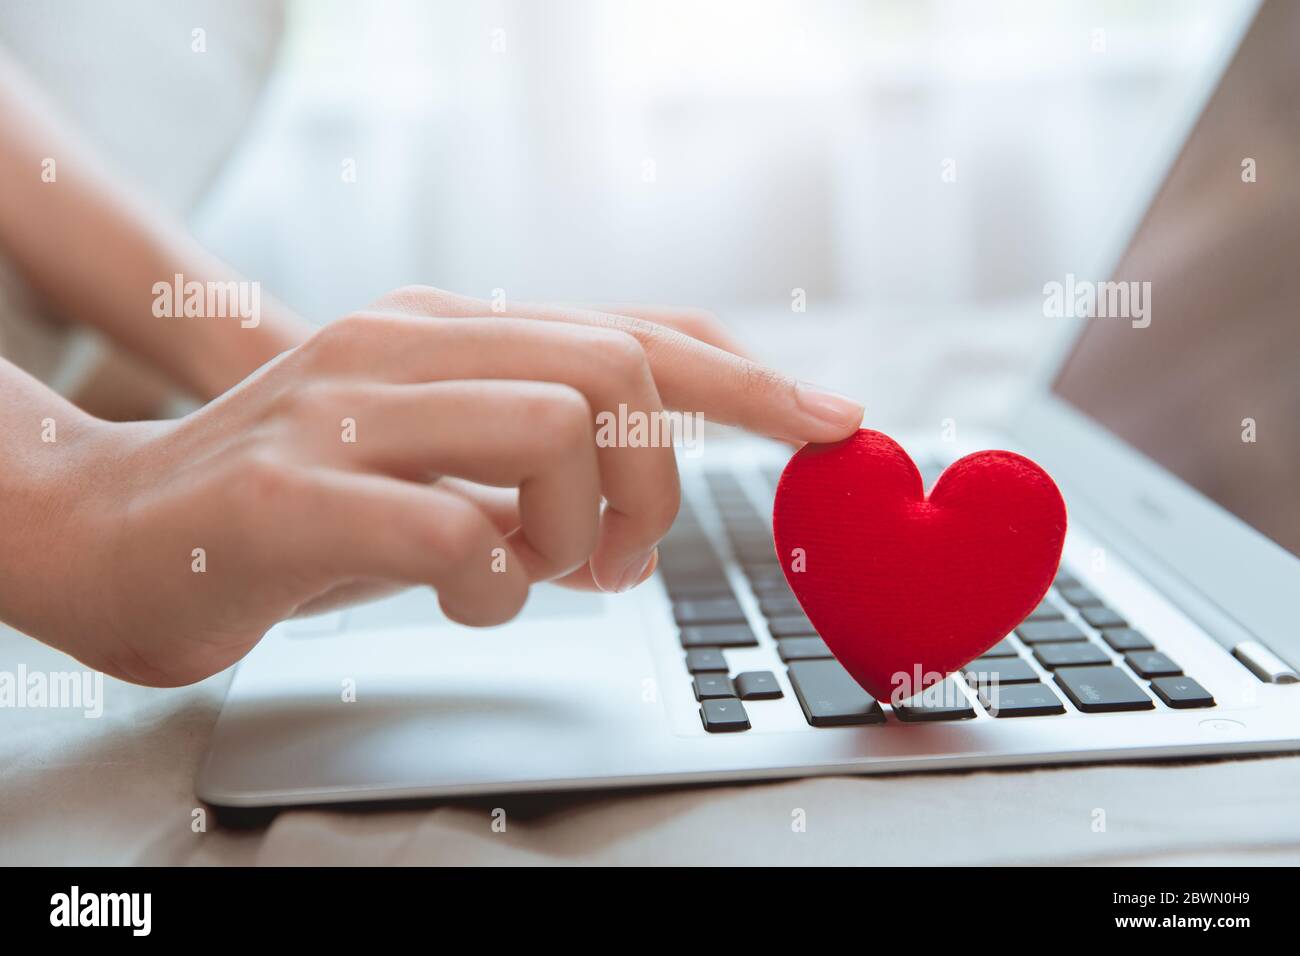 Hand touching red heart on laptop keyboard for flirt love chat or lover online text messenger for find date couple during stay home Coronavirus pandem Stock Photo